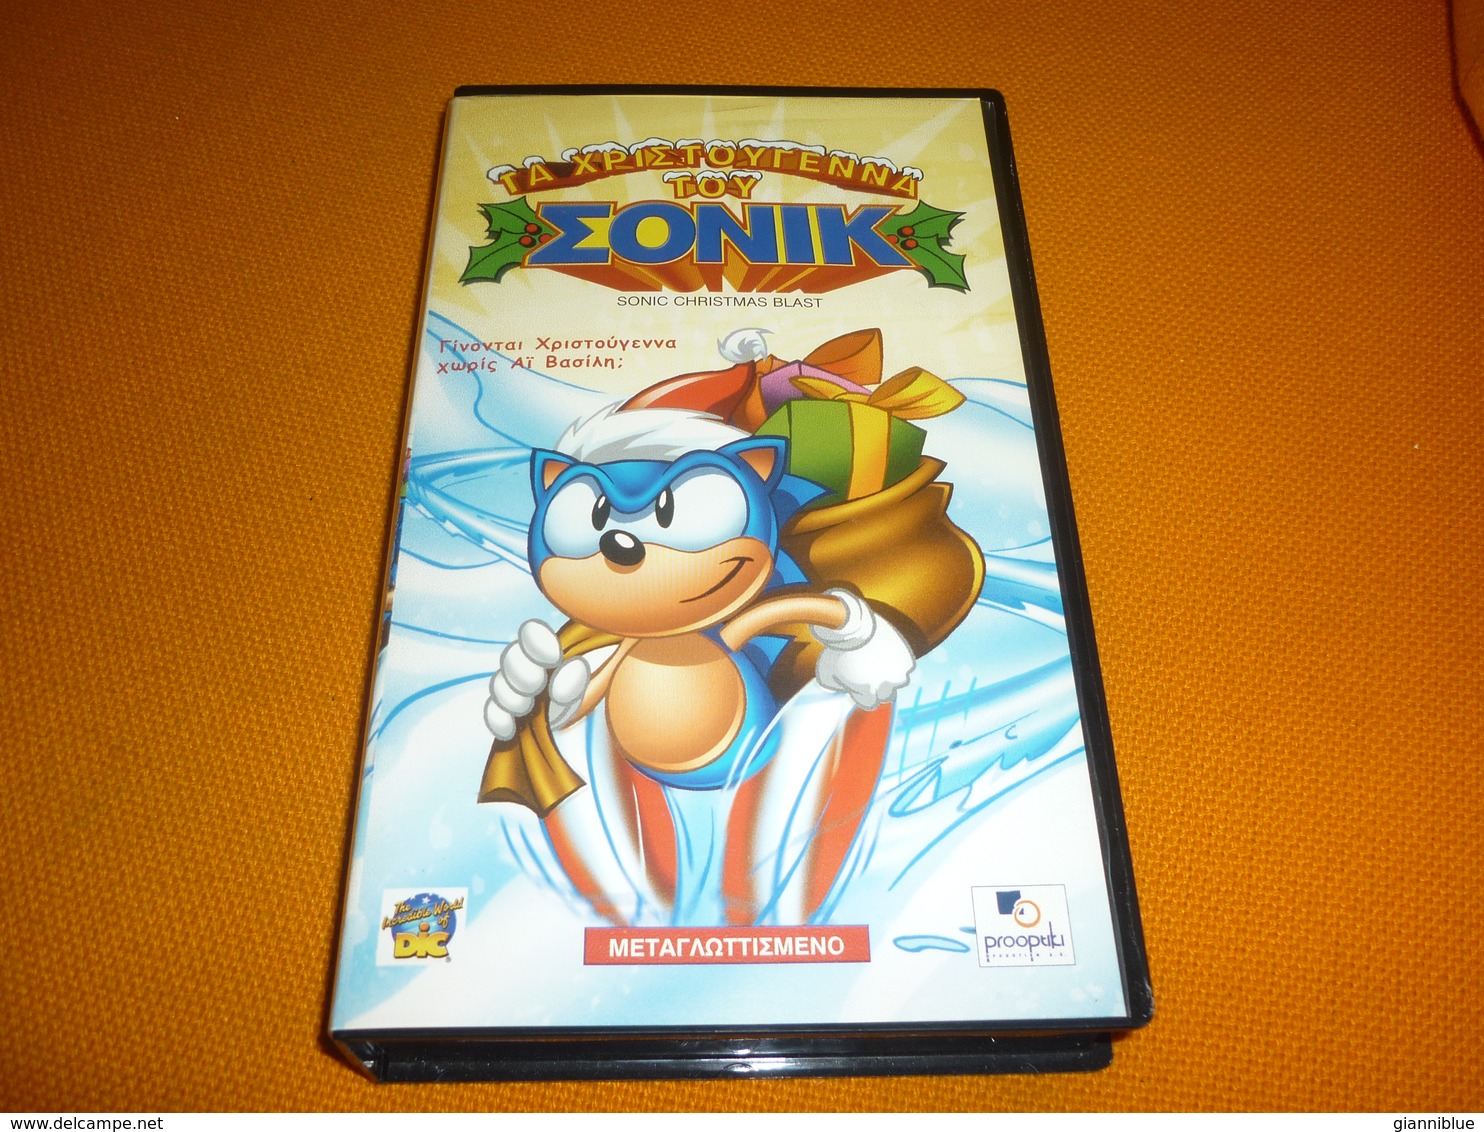 Sonic The Hedgehog Old Greek Vhs Cassette Video Tape From Greece - Cartoons